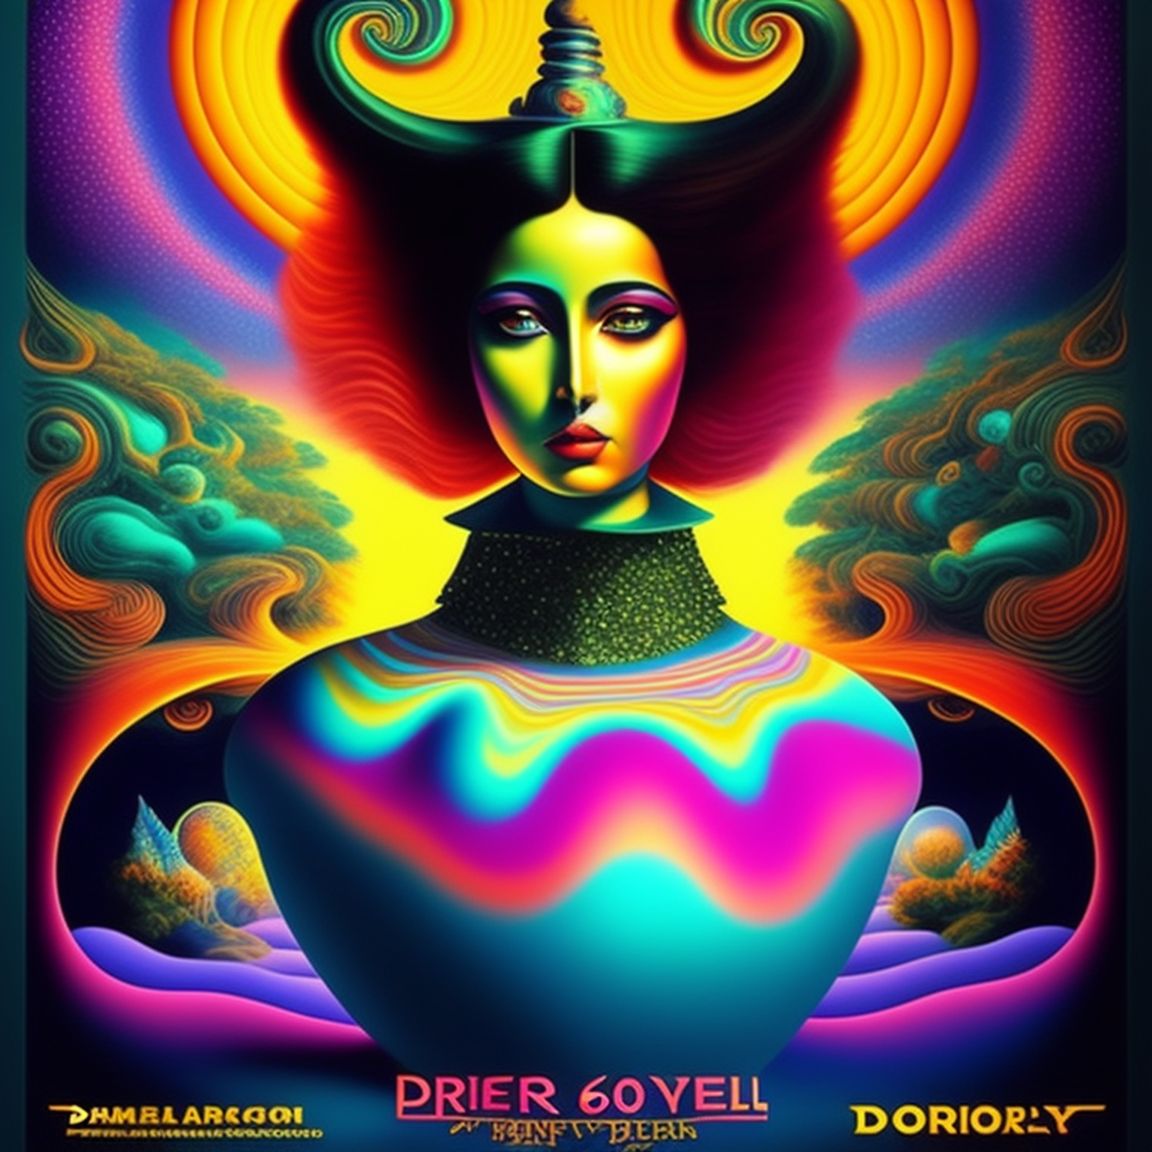 psychedelic 60s poster, Dreamlike, pastel, Surreal, High contrast, Elegant, Digital art, inspired by salvador dali, art by michael cheval and camille chew, trending on instagram, instagram famous, fantasy.